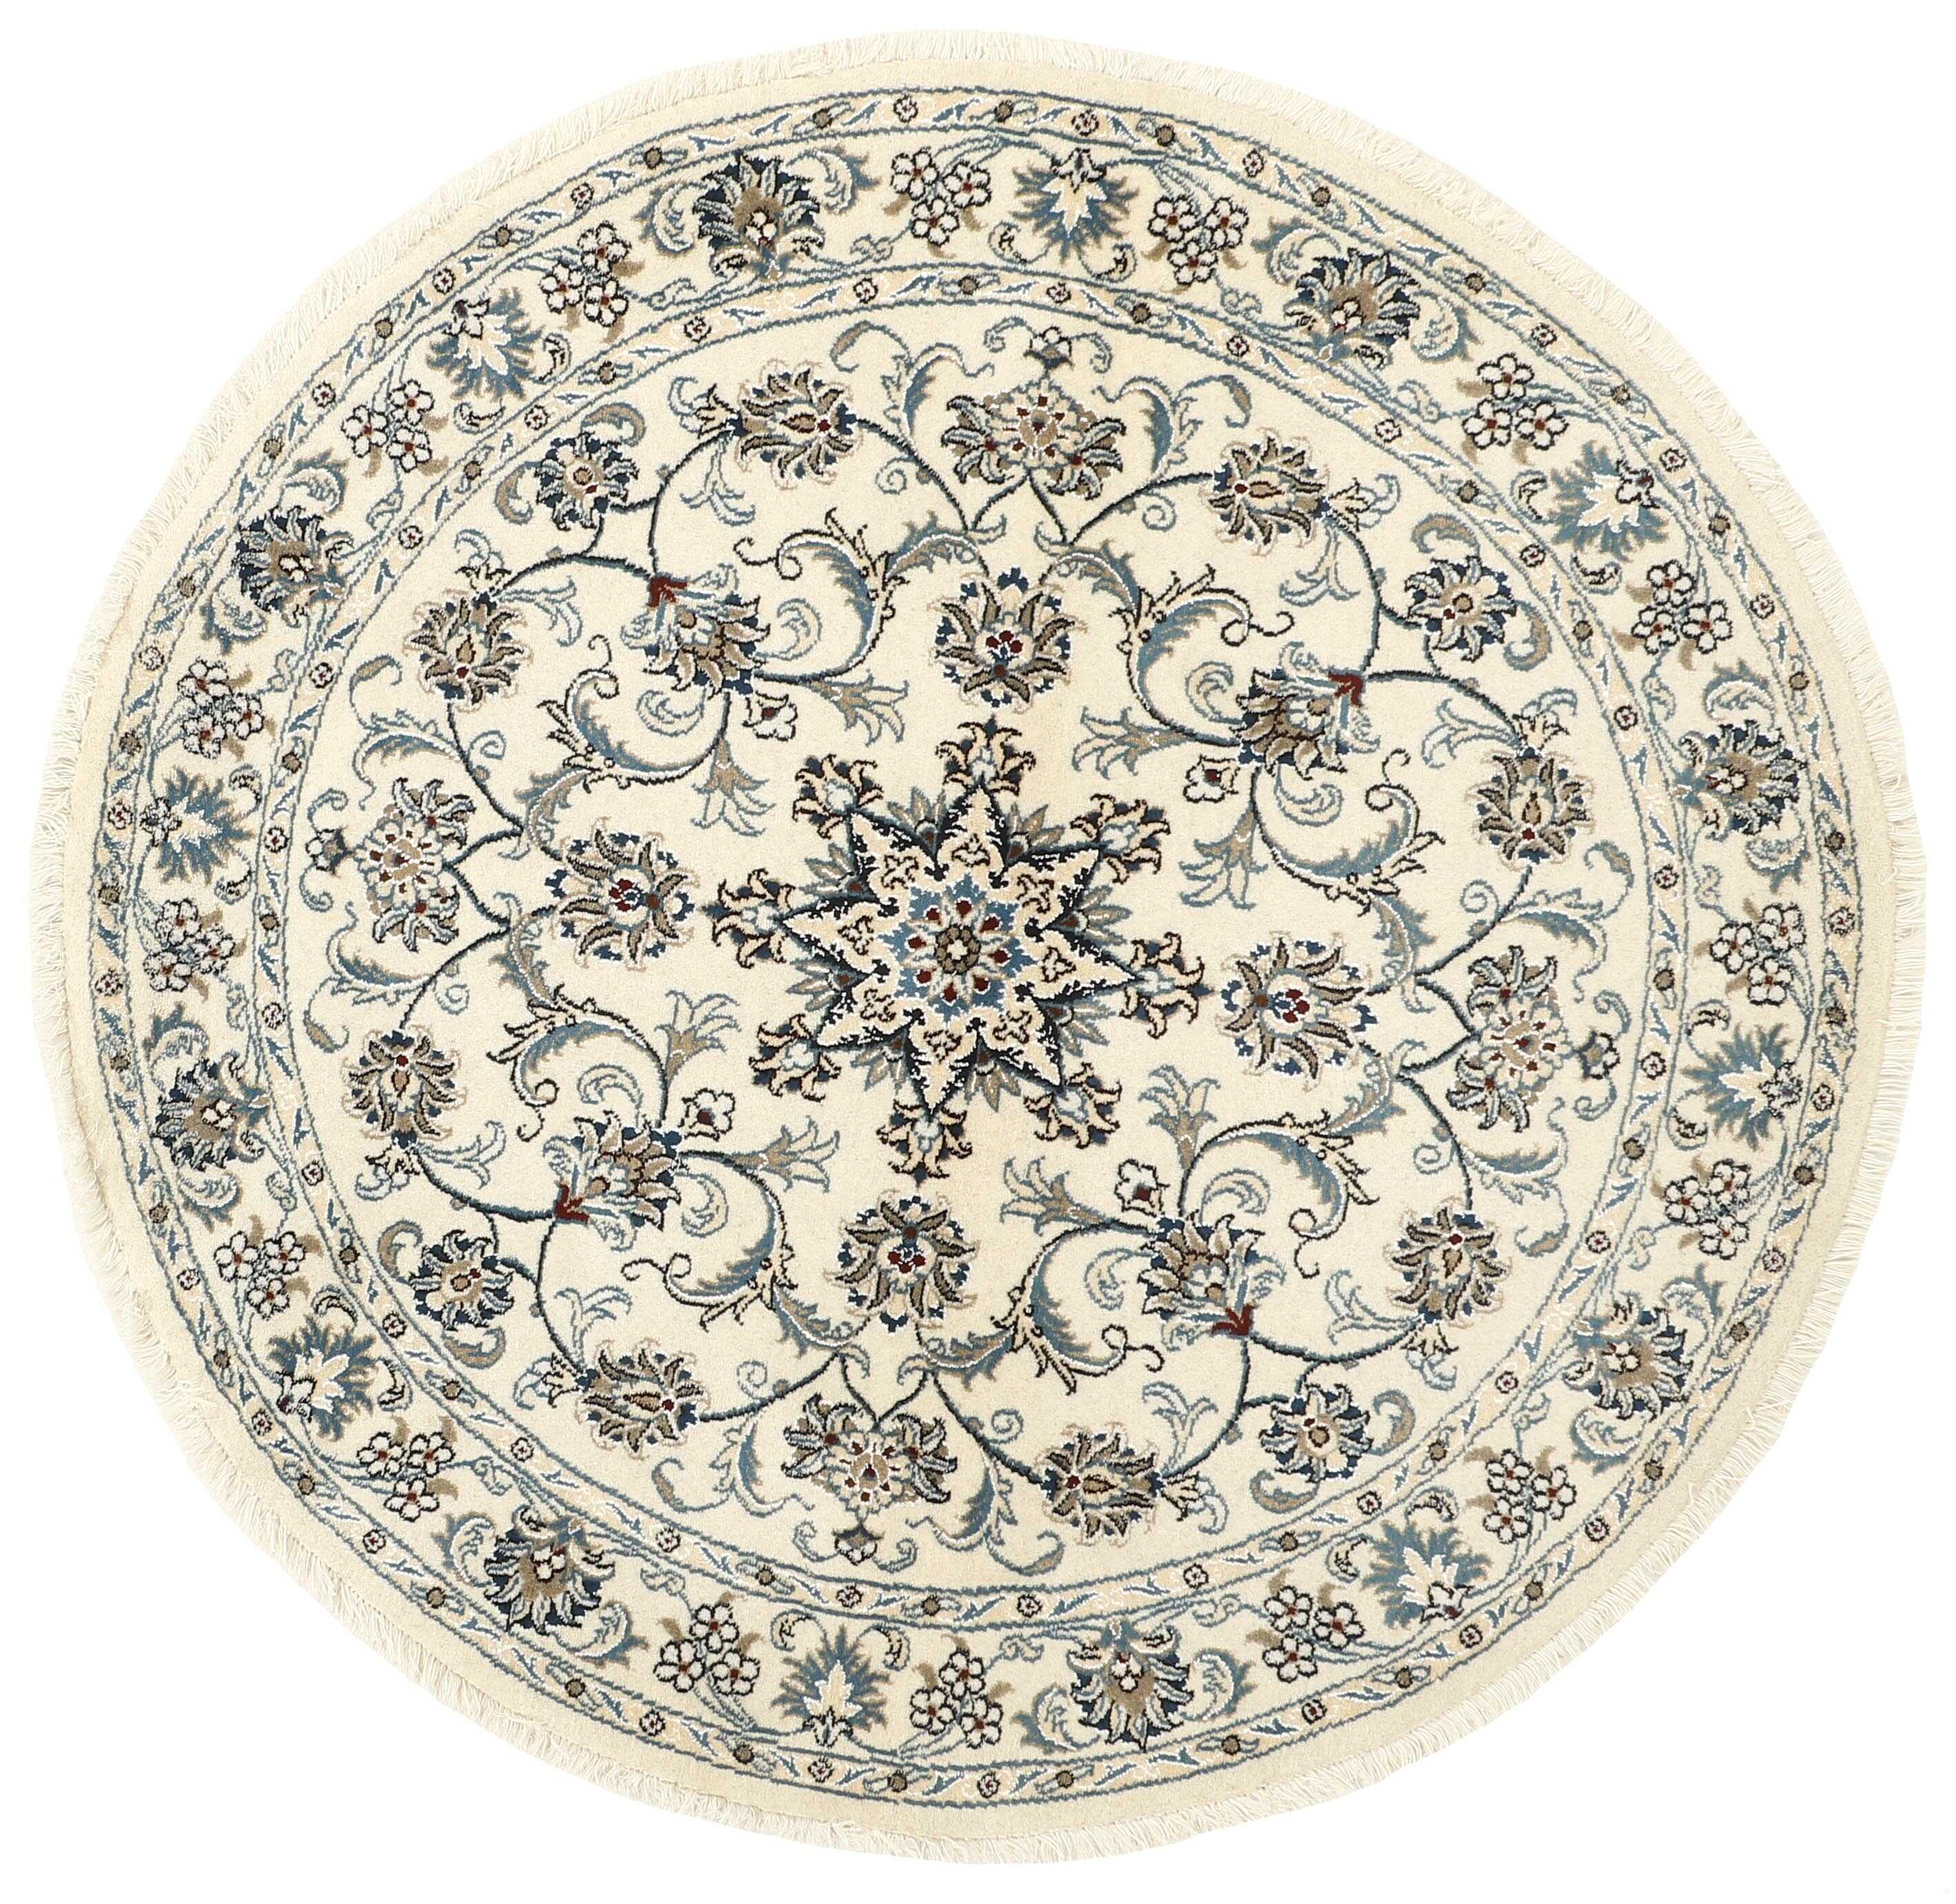 Authentic persian circle rug with a traditional floral design in beige